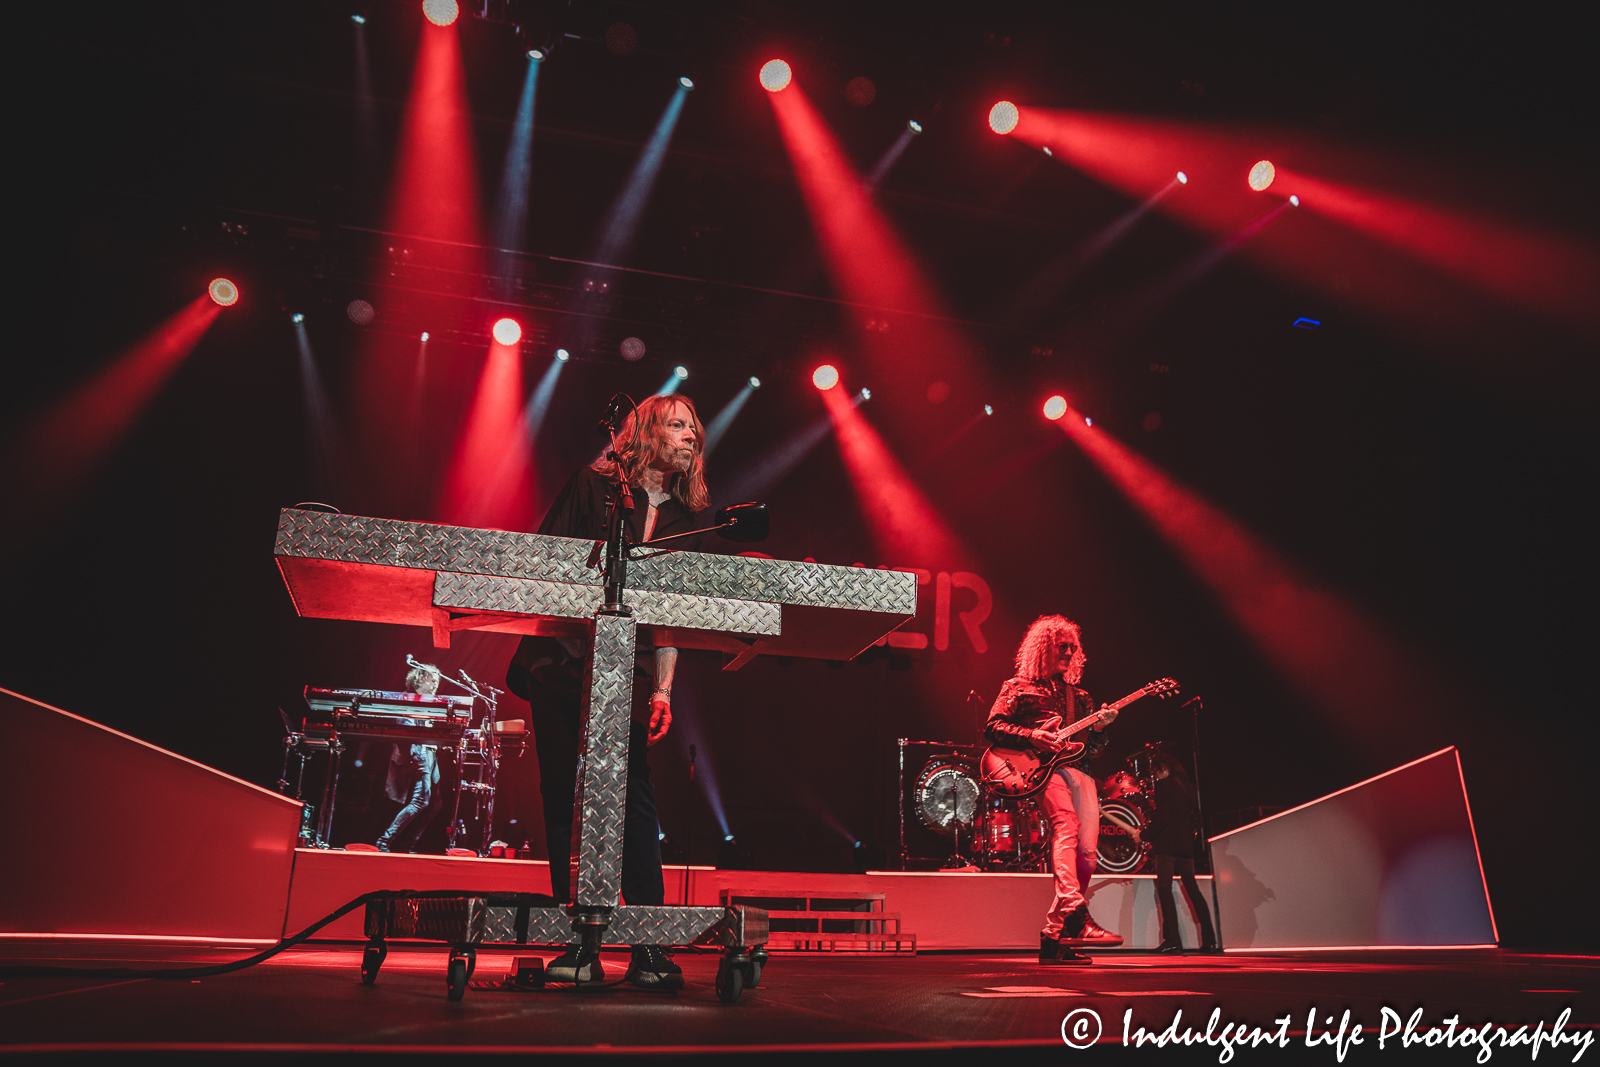 Foreigner band members performing "Cold as Ice" live in concert at Landon Arena inside of Stormont Vail Events Center in Topeka, KS on May 2, 2023.